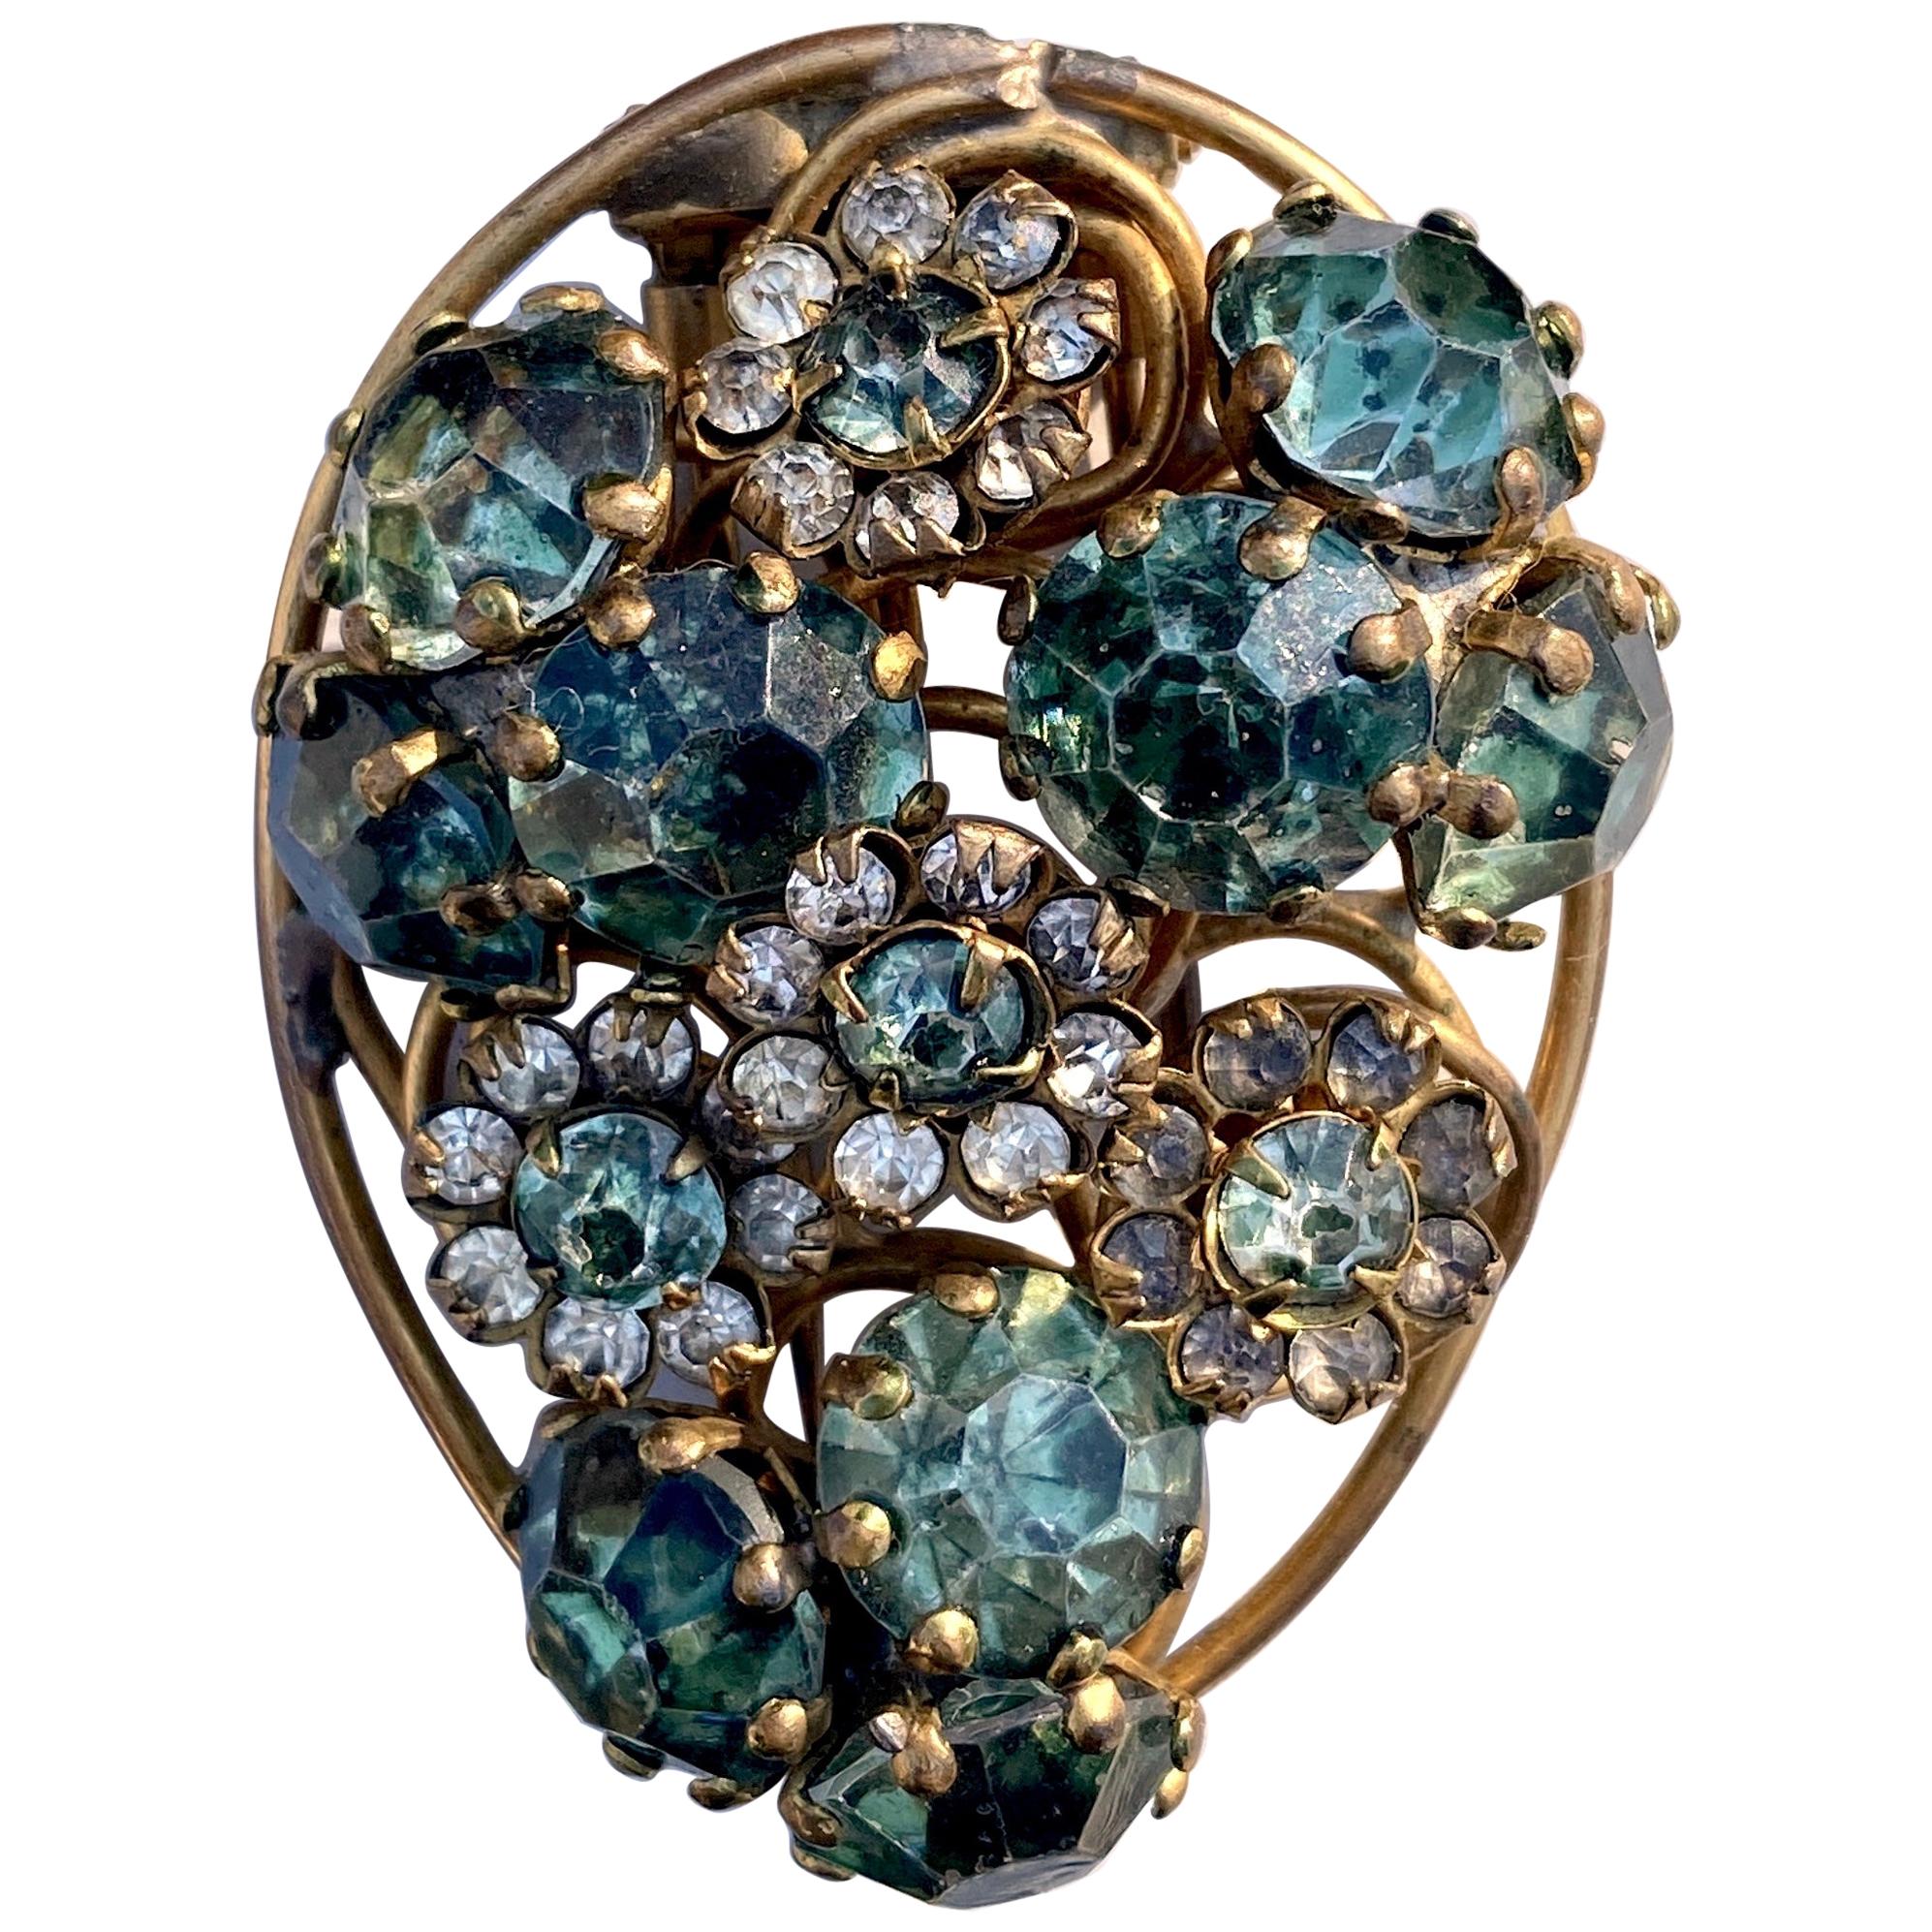 Important Countess Cis Brooch For Sale at 1stDibs